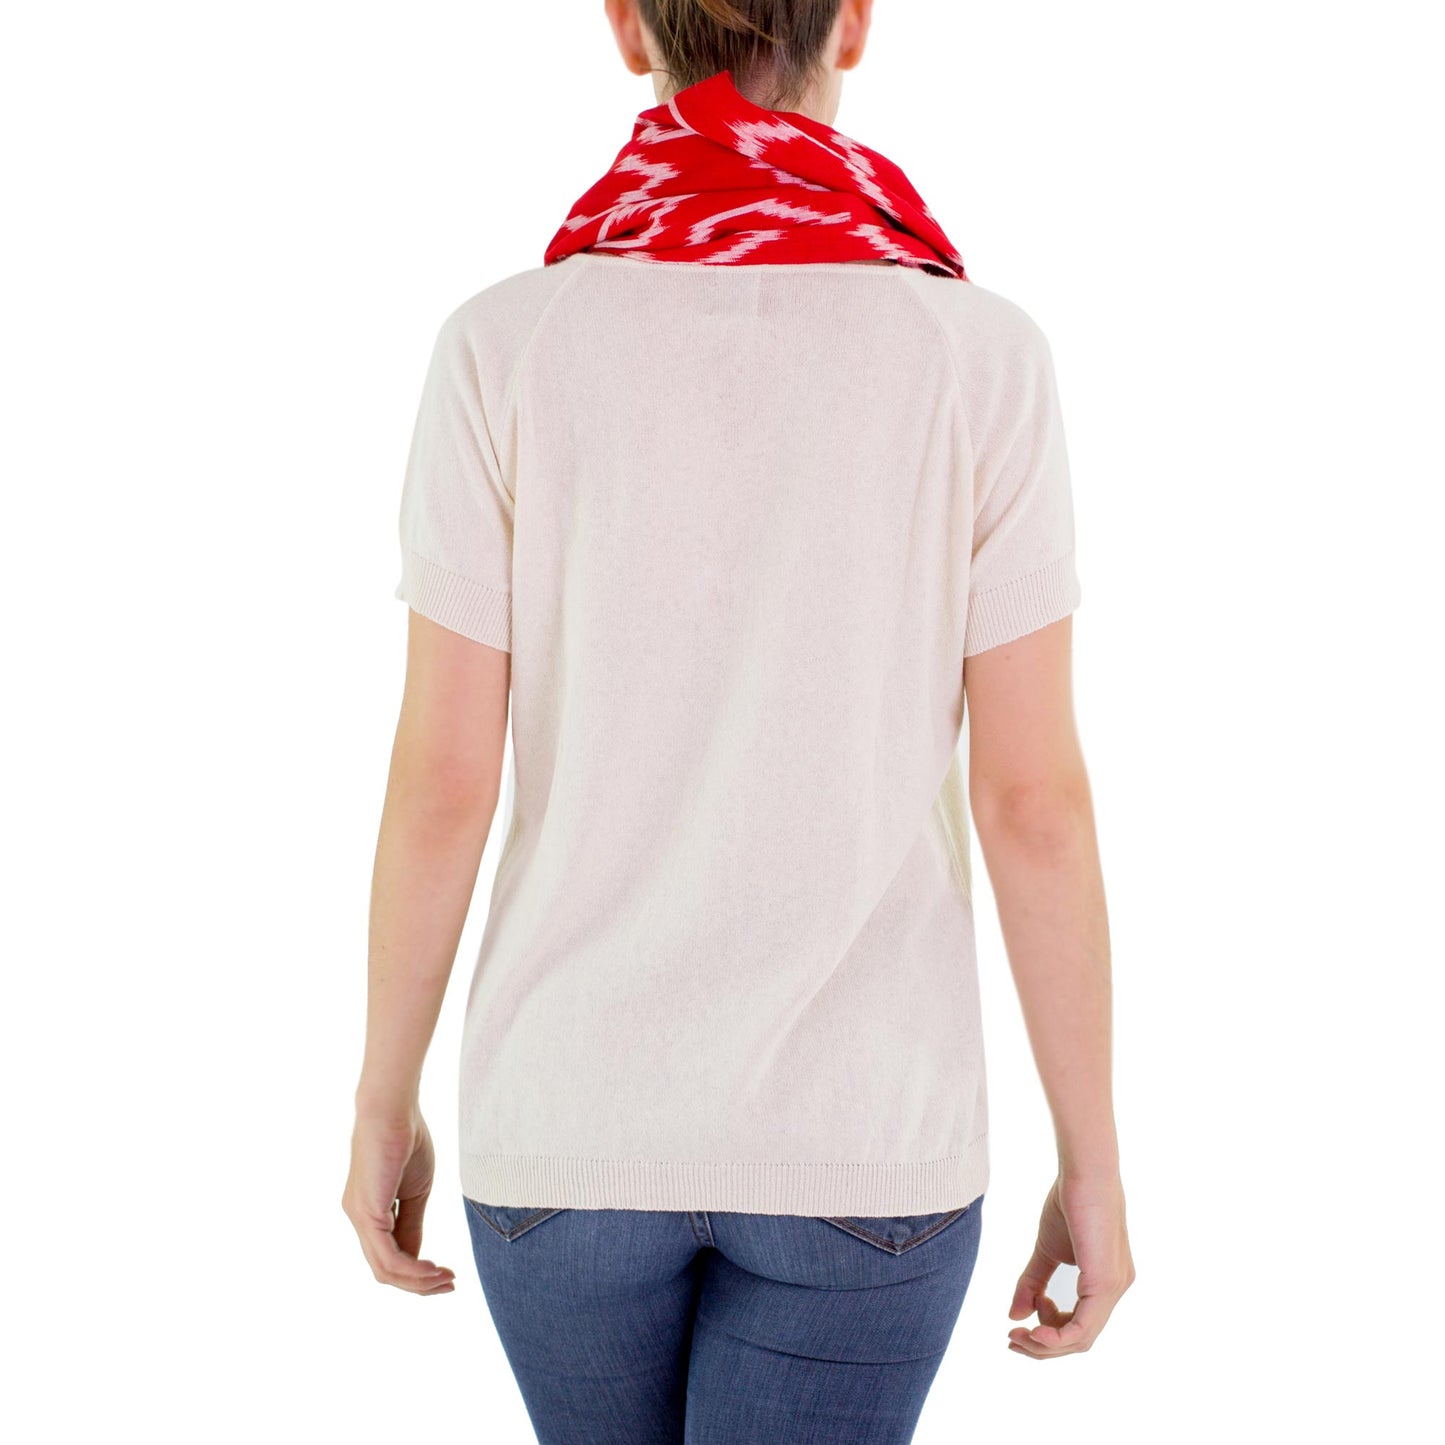 Ruby Maya Red White Patterned Infinity Scarf in Hand Woven Cotton